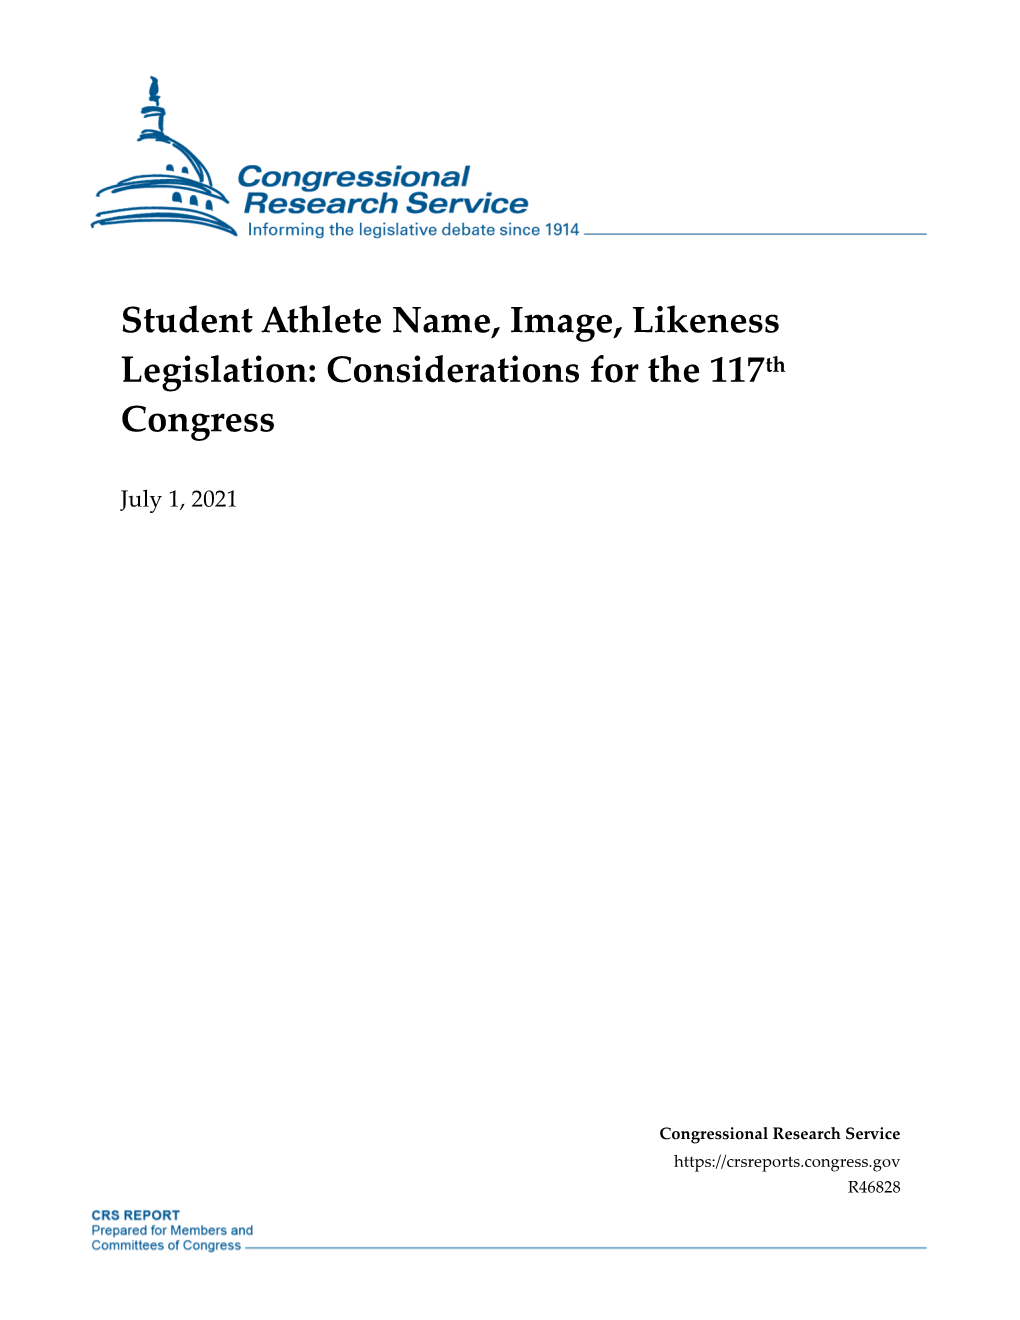 Student Athlete Name, Image, Likeness Legislation: Considerations for the 117Th Congress